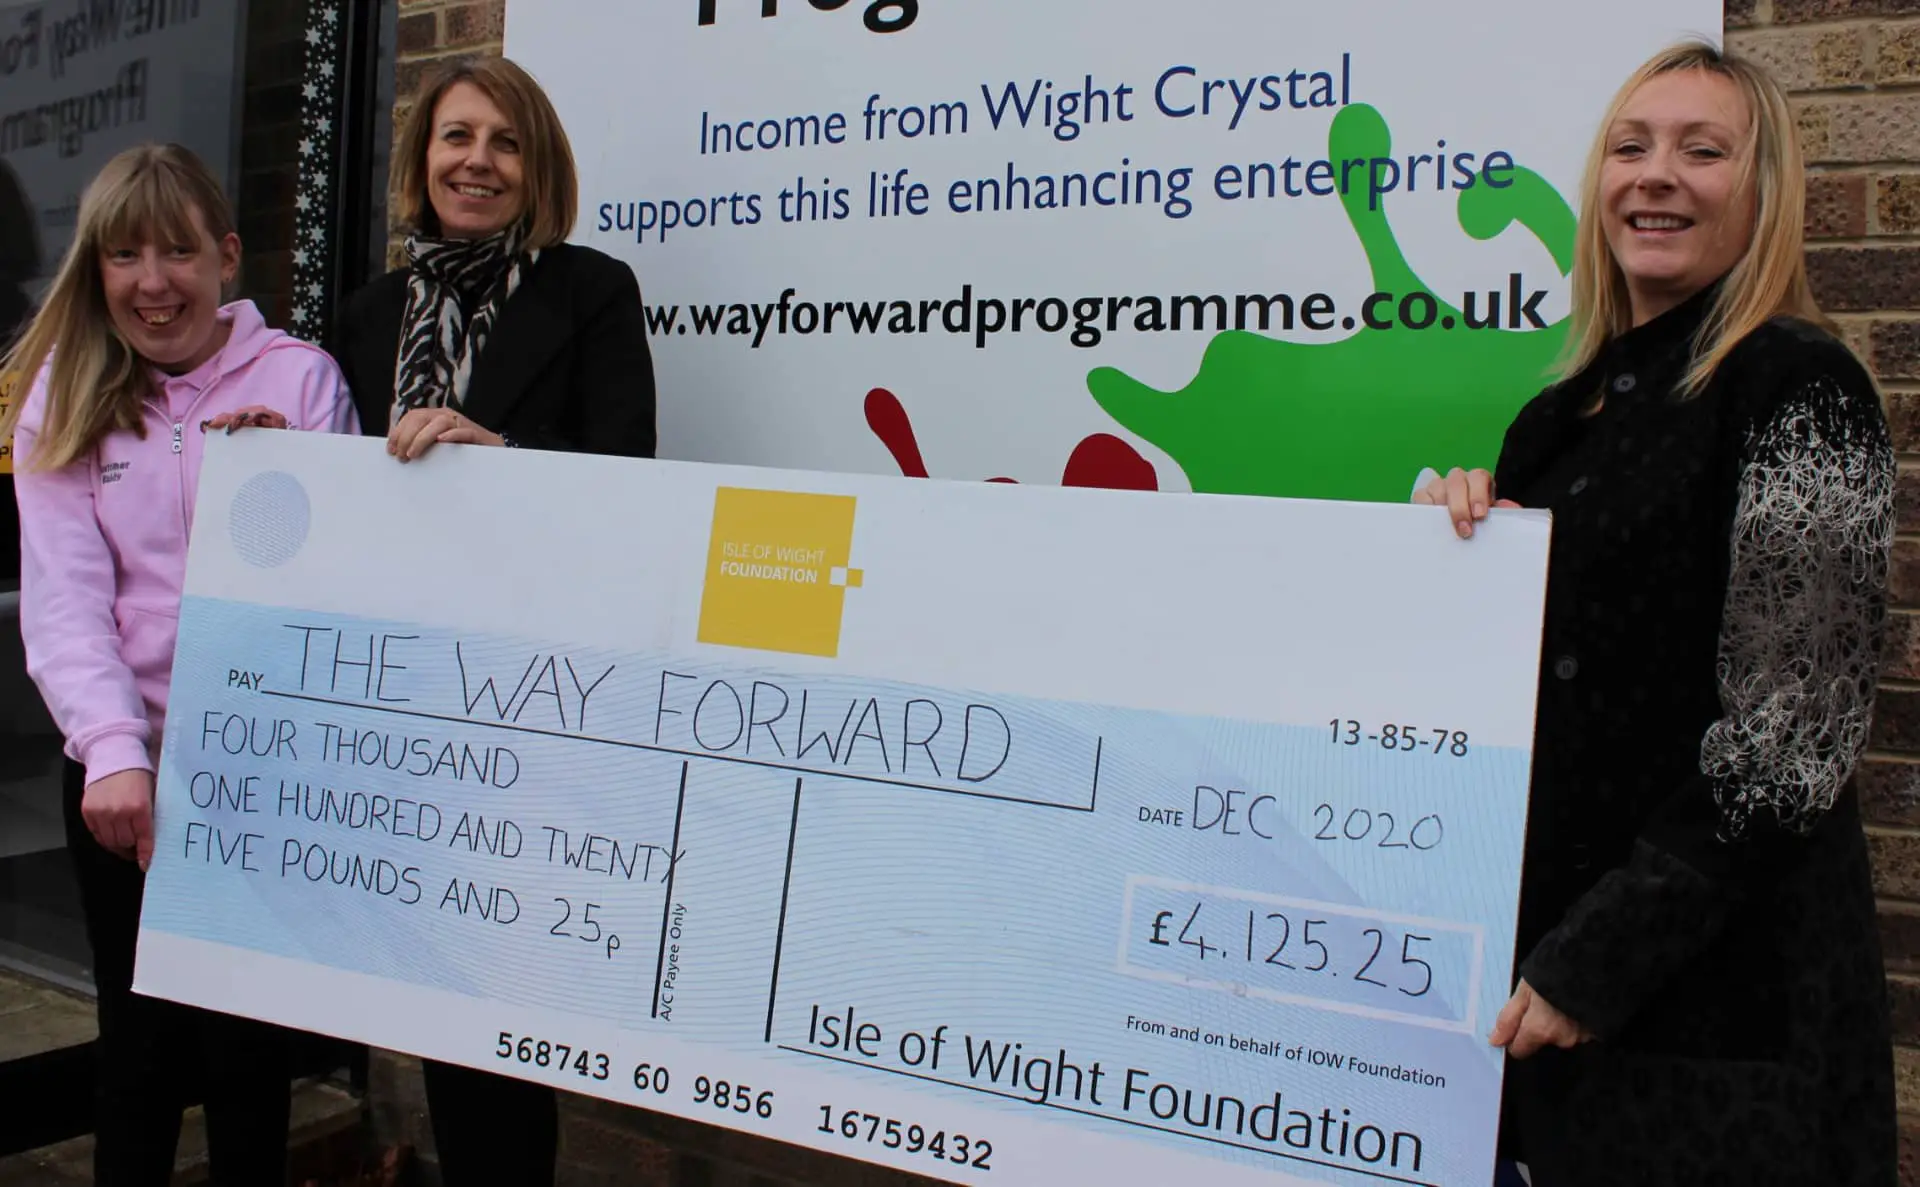 Lucy Dreyer and Tracey Hill Way Forward Programme and Samantha ORourke Island Roads Isle of Wight Foundation